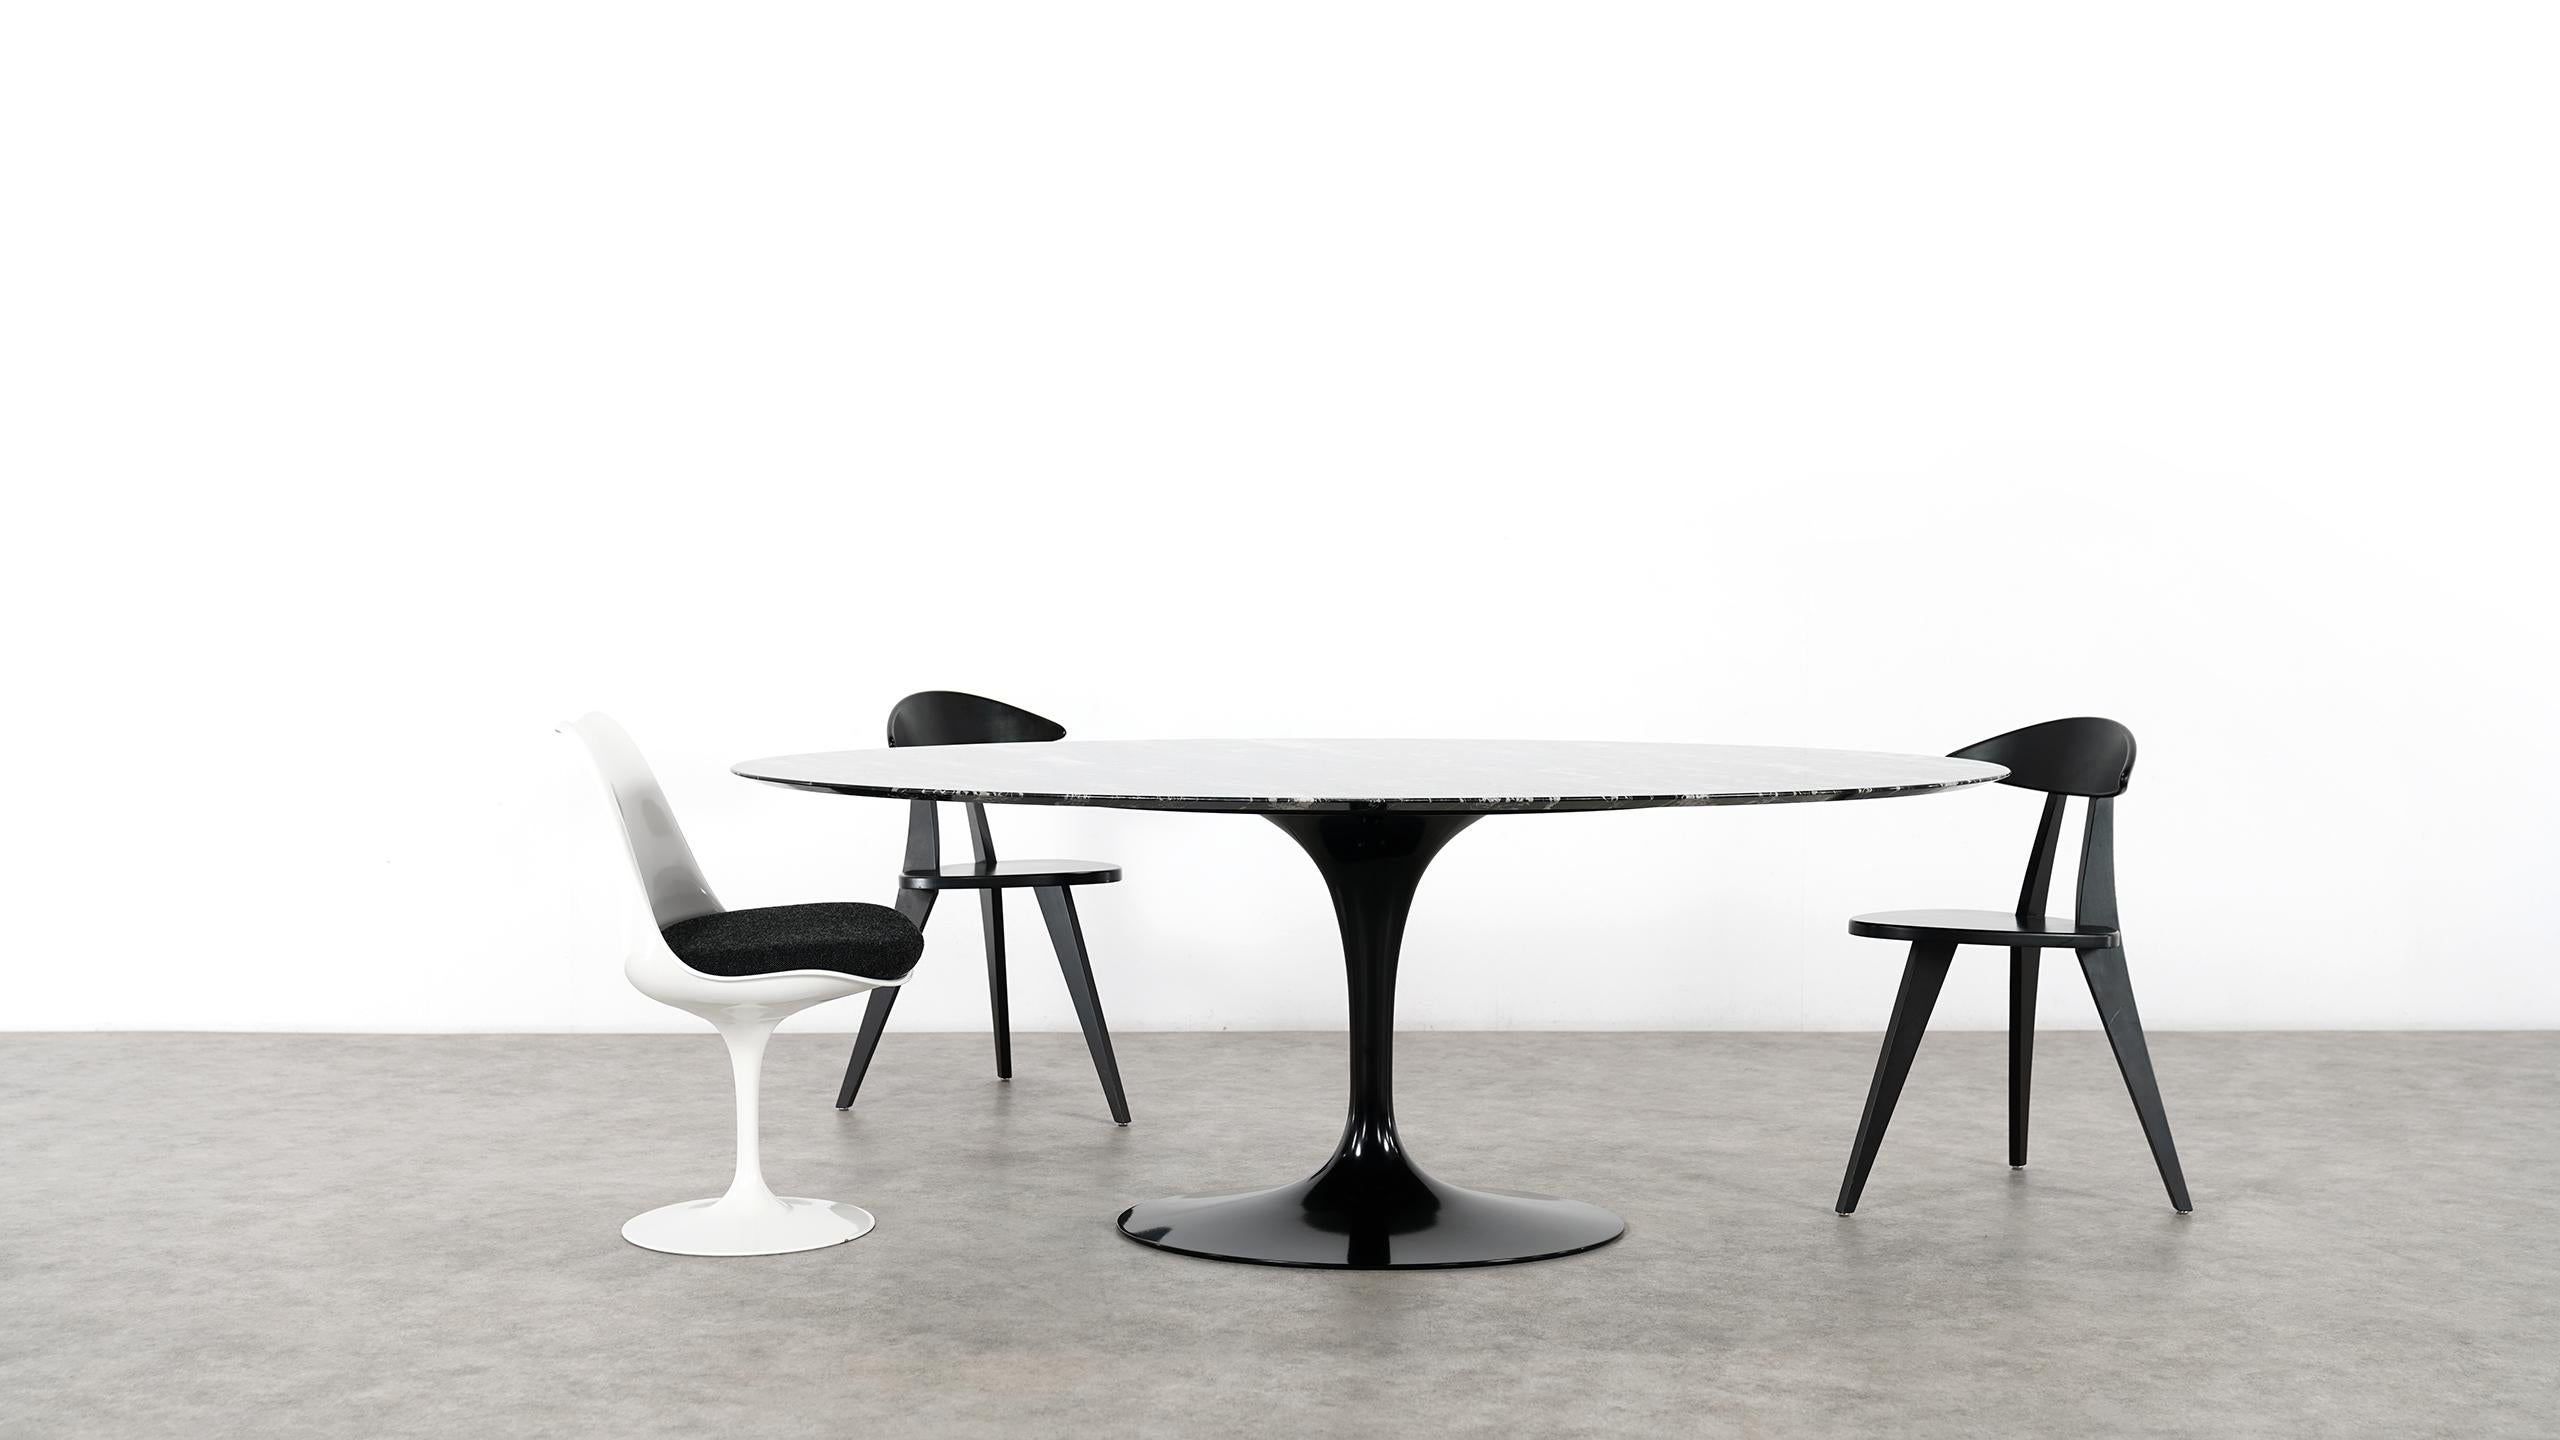 Eero Saarinen, oval marble dining table
1955 for Knoll International

Eero Saarinen created the tulip table - the first one-legged table in the history of furniture design - in the 1950s with the intention
of doing something against what he